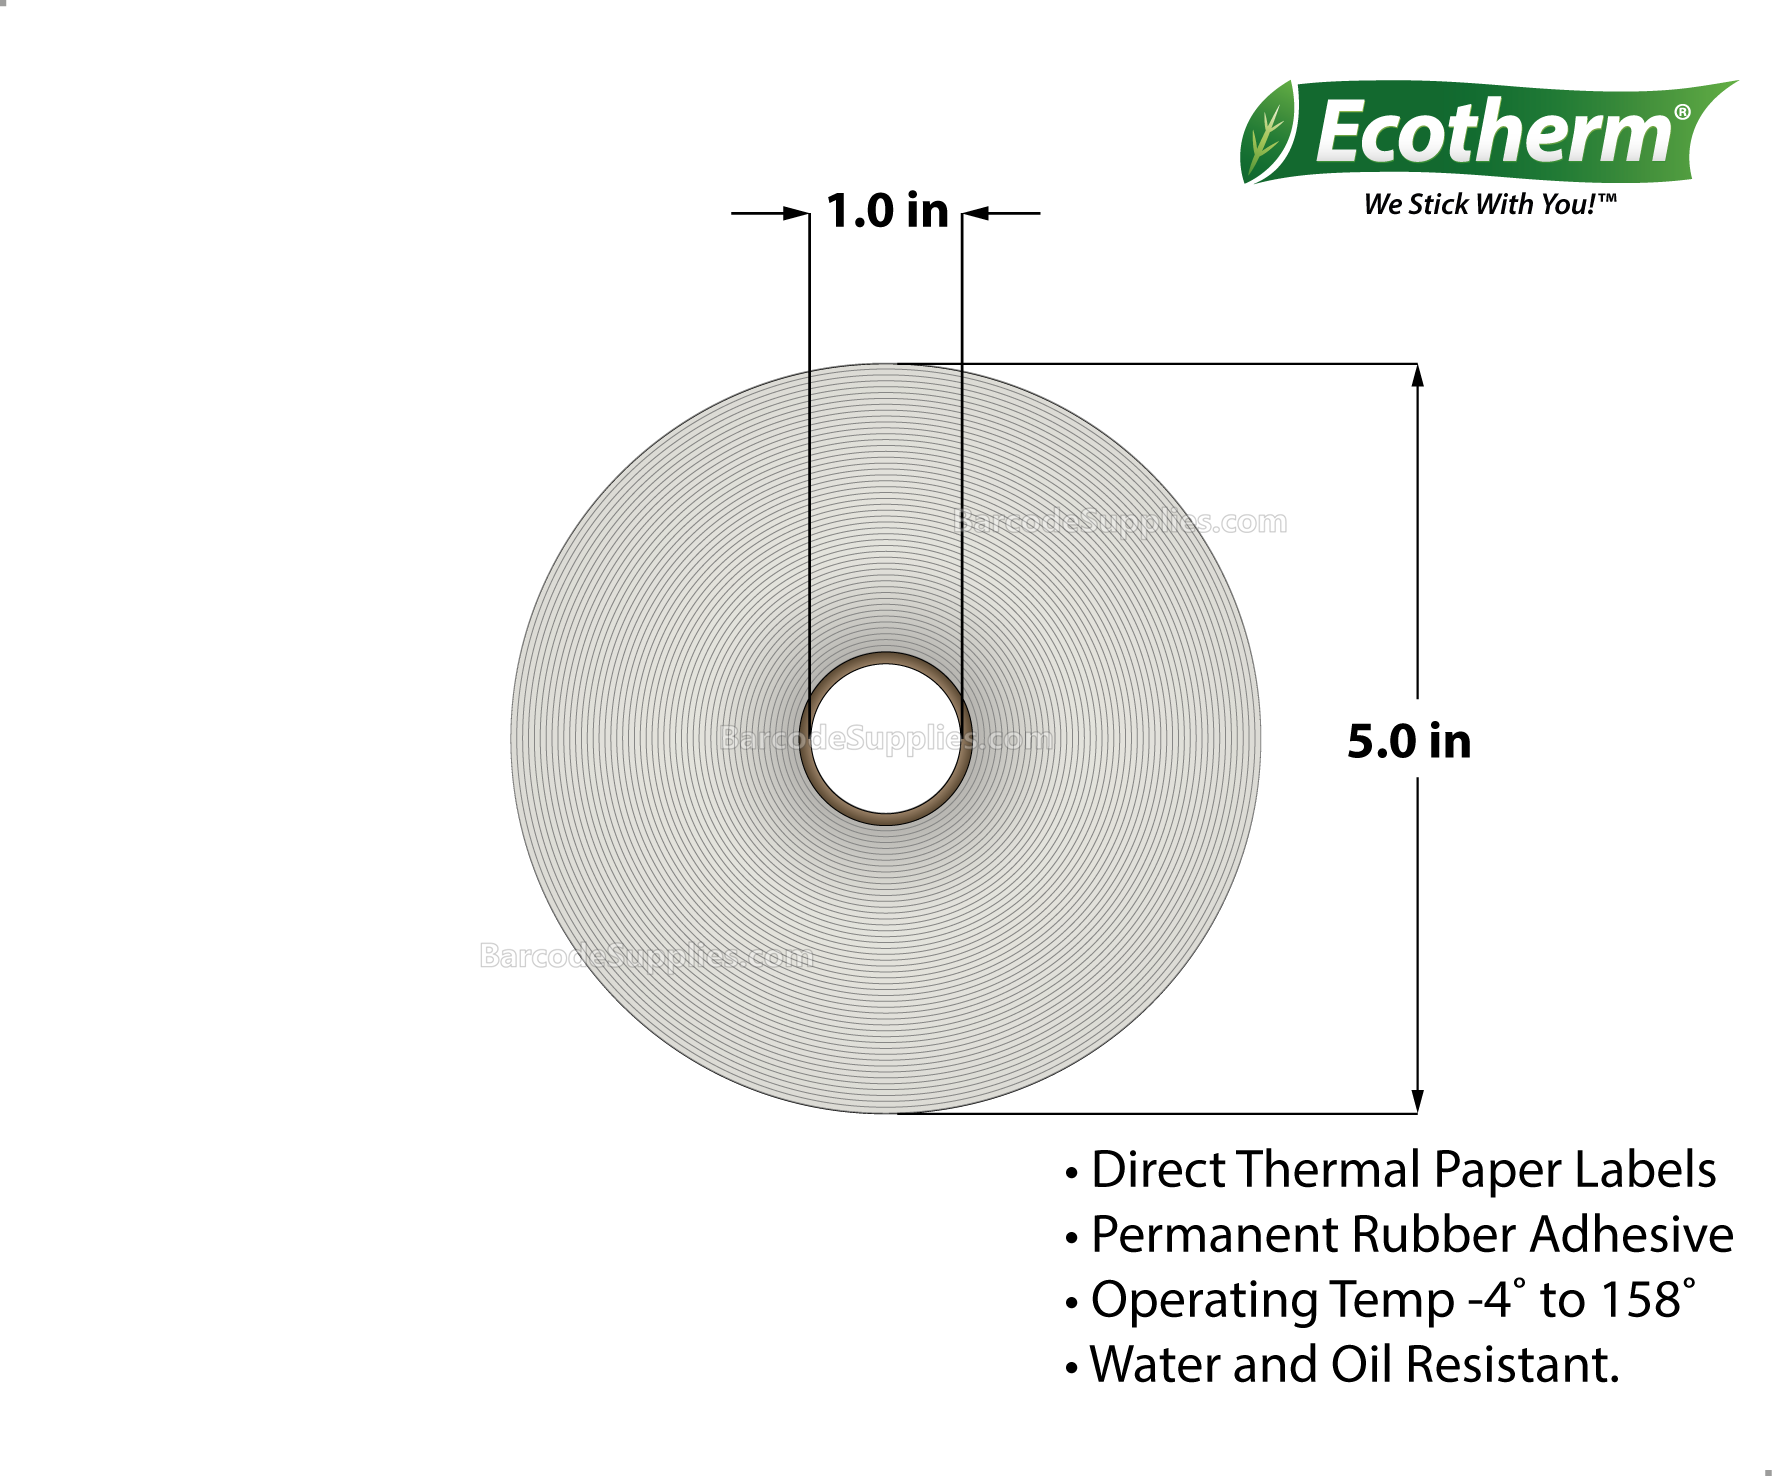 4 x 1.5 Direct Thermal White Labels With Rubber Adhesive - Perforated - 1800 Labels Per Roll - Carton Of 6 Rolls - 10800 Labels Total - MPN: ECOTHERM15148-6